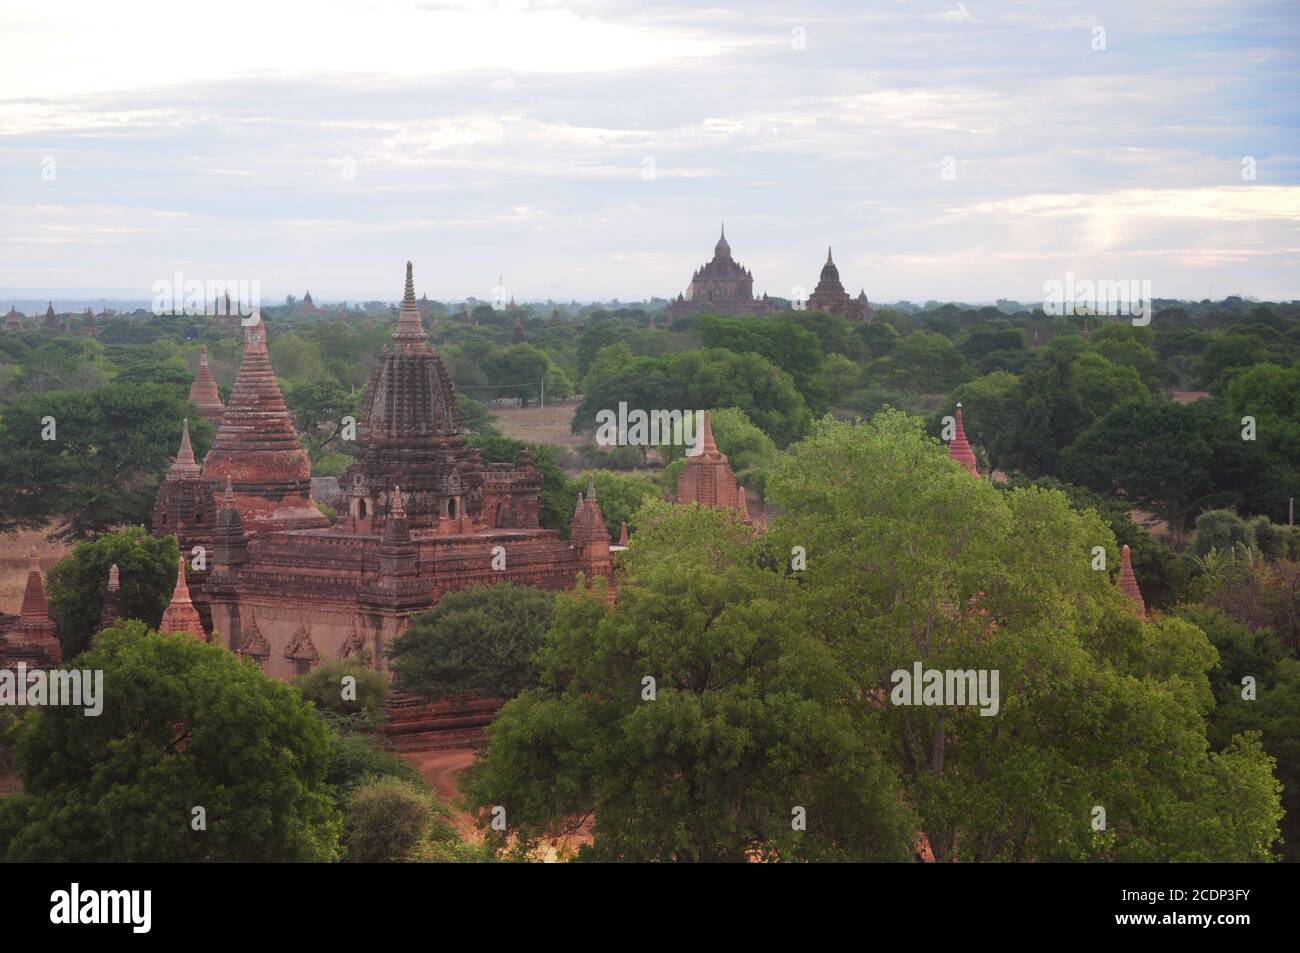 Aerial view of the Old Bagan landscape in Myanmar surrounded by lush trees Stock Photo